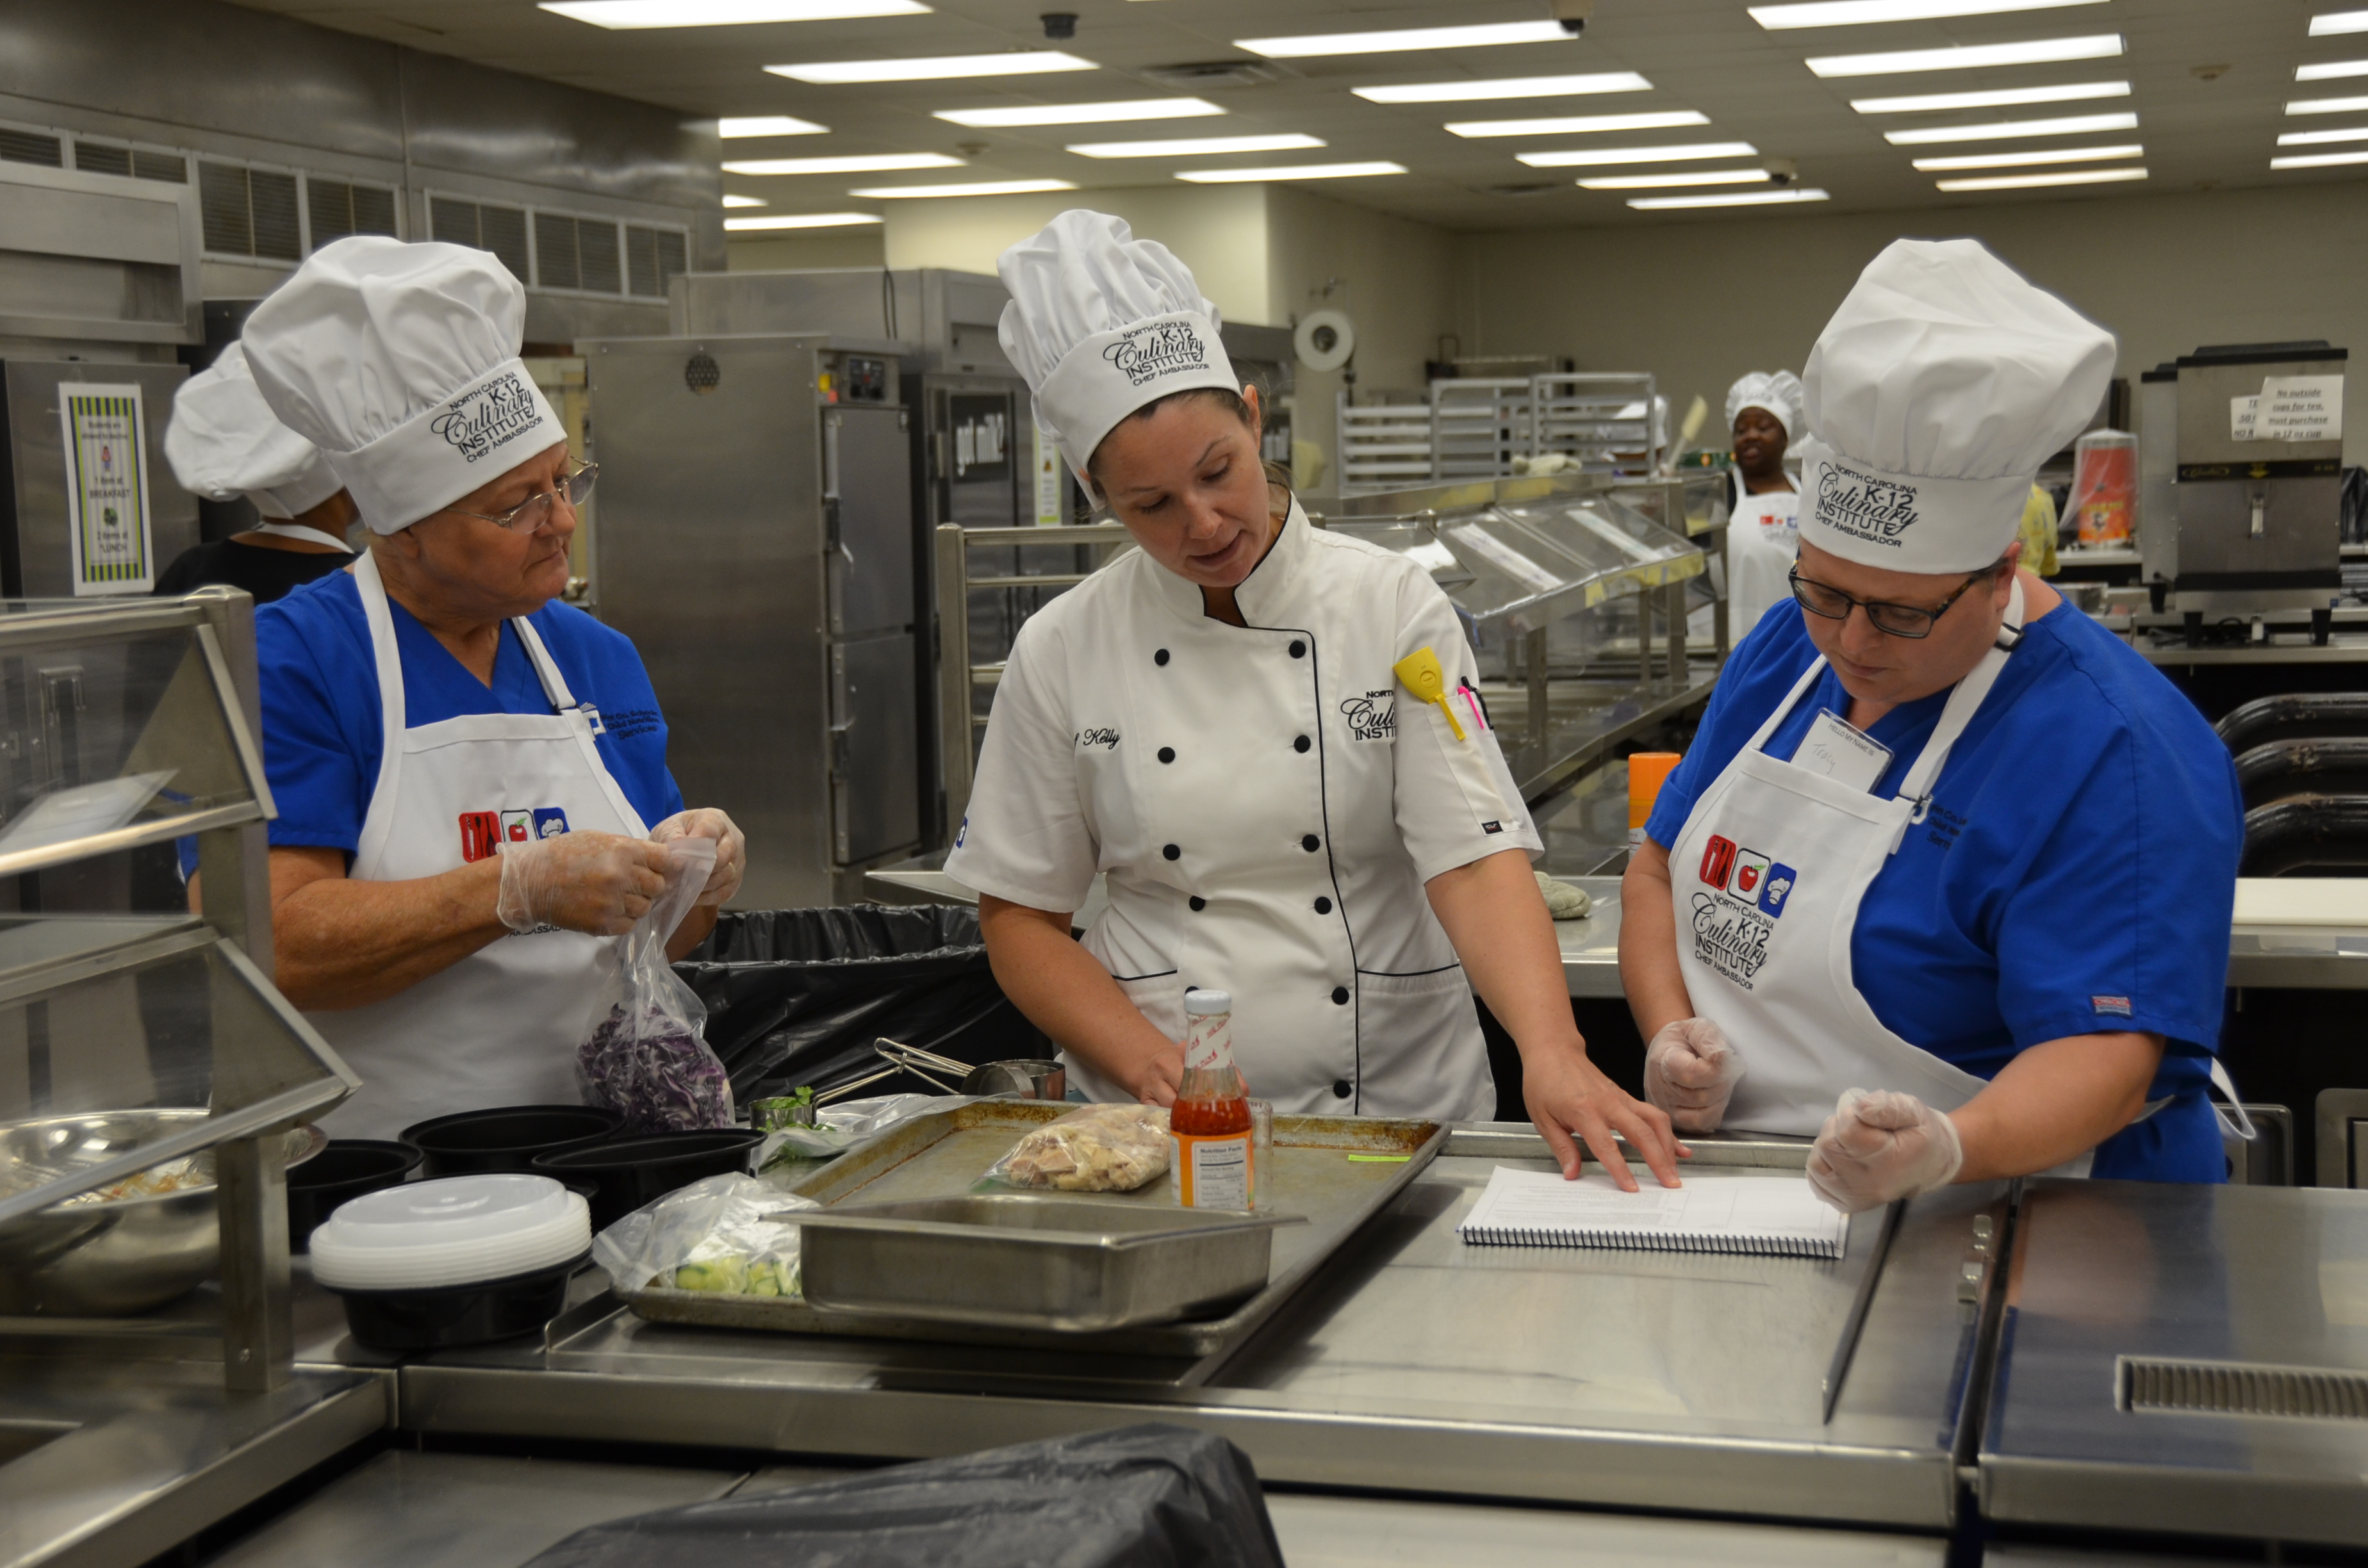 North Carolina’s K12 Culinary Institute is Working to Provide